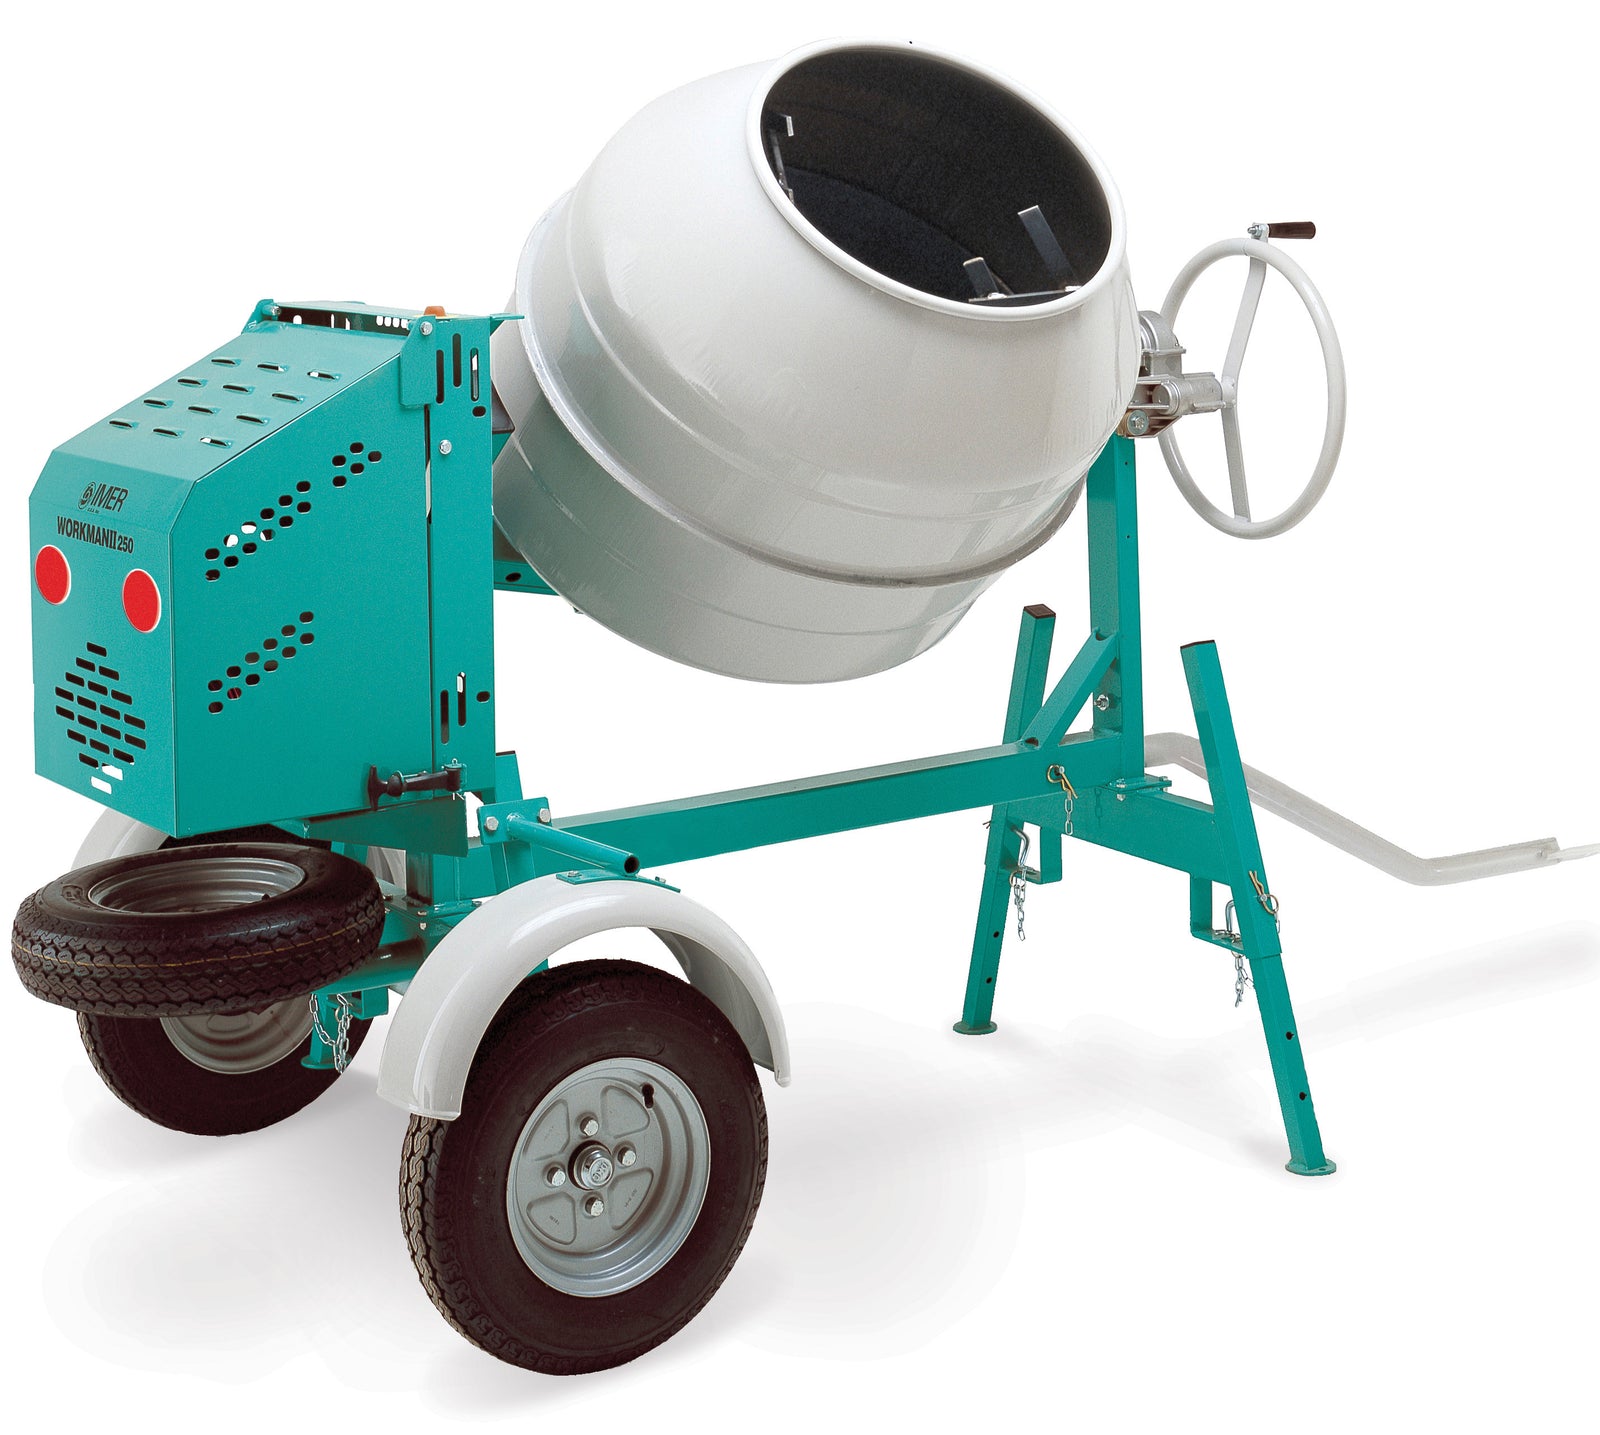 IMER Minuteman II 5 CF 110v Portable Mixer with POLY DRUM